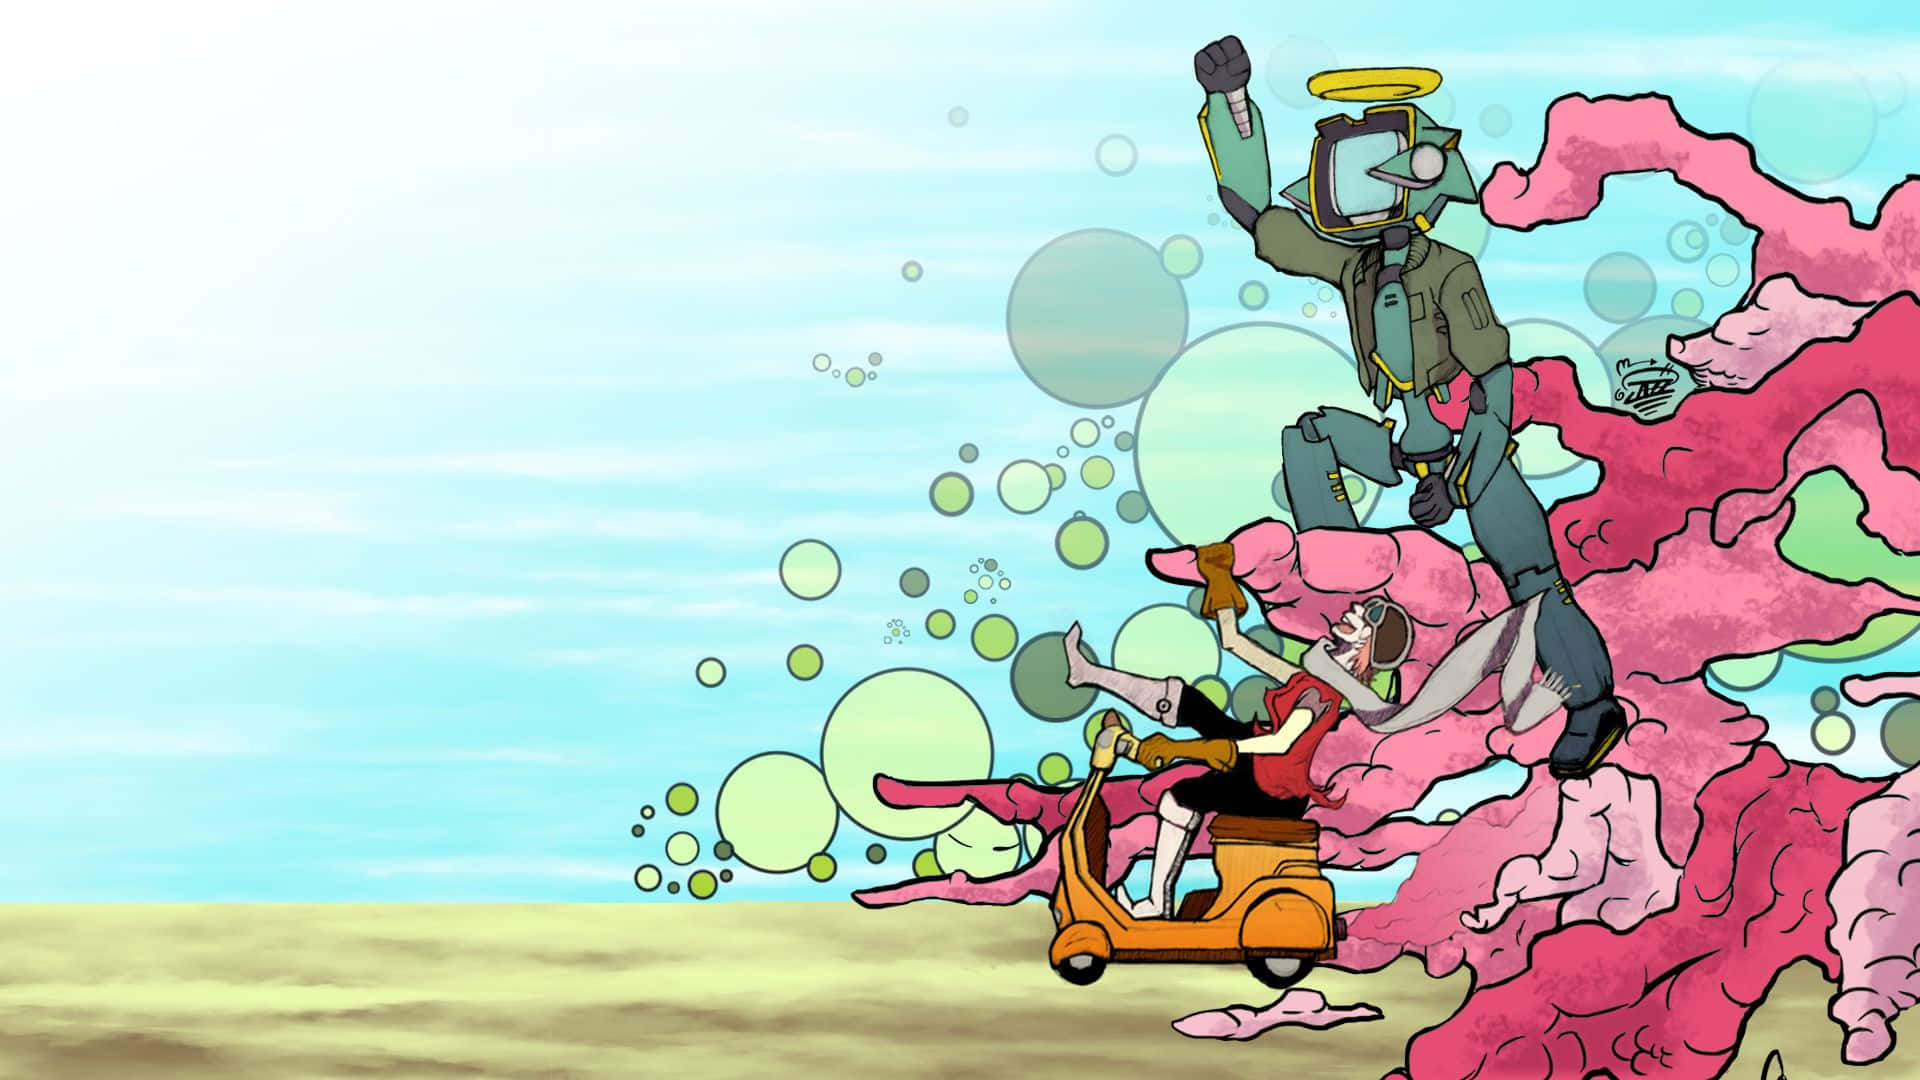 A scene from the anime series, FLCL Alternative Wallpaper